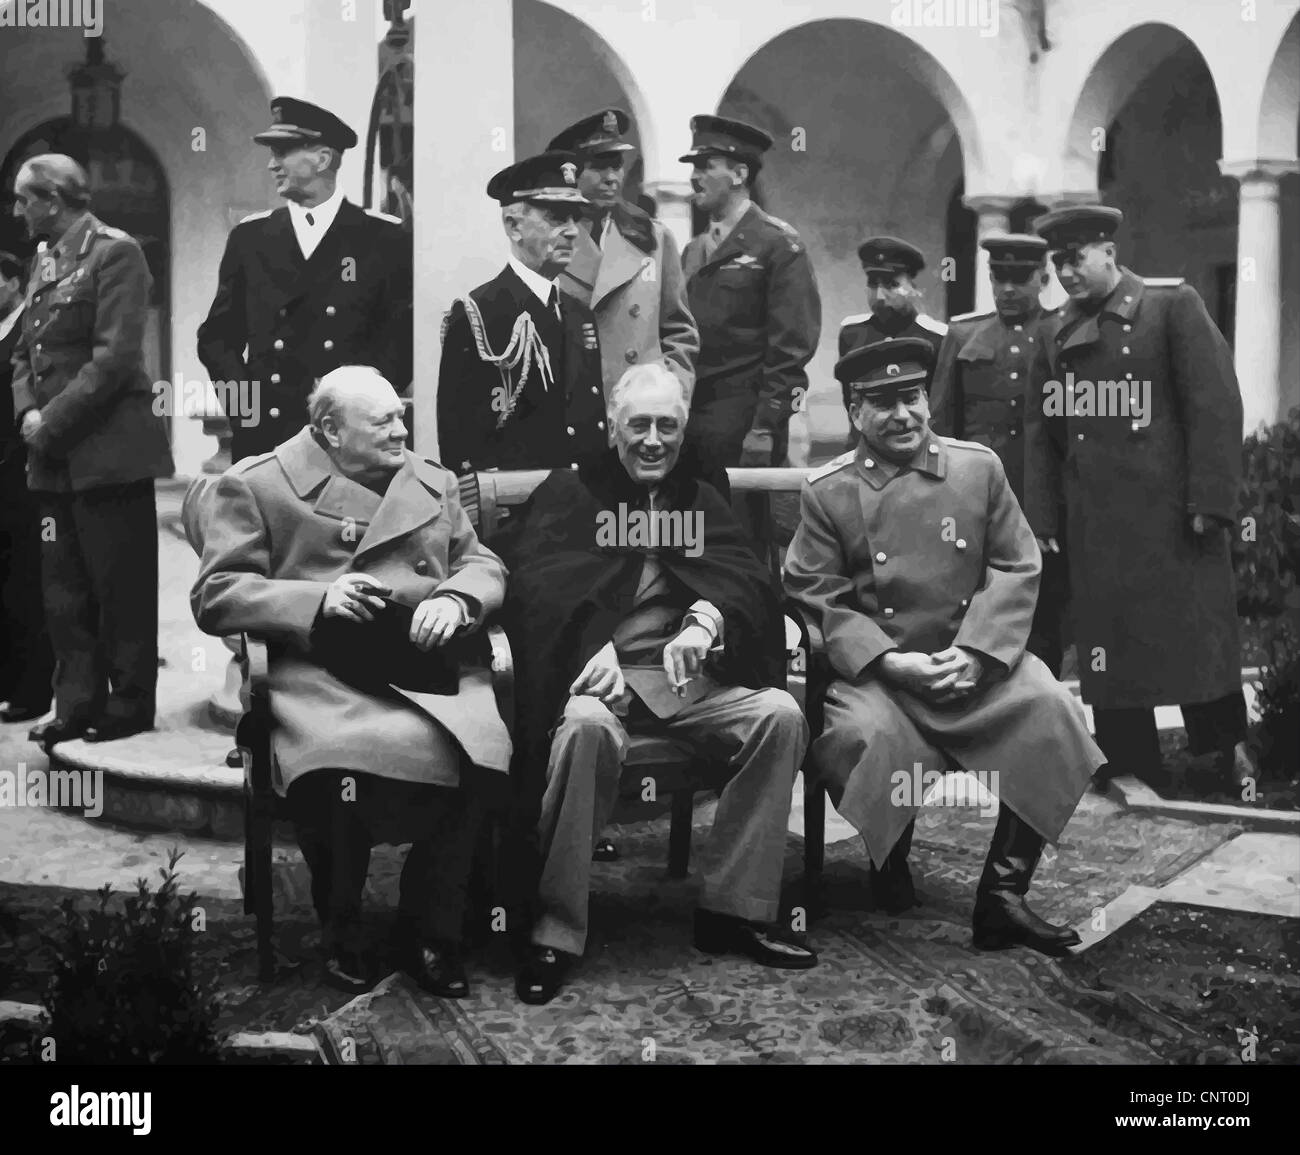 Digitally restored photo of Winston Churchill, Franklin Roosevelt, and Joseph Stalin meeting at The Yalta Conference. Stock Photo